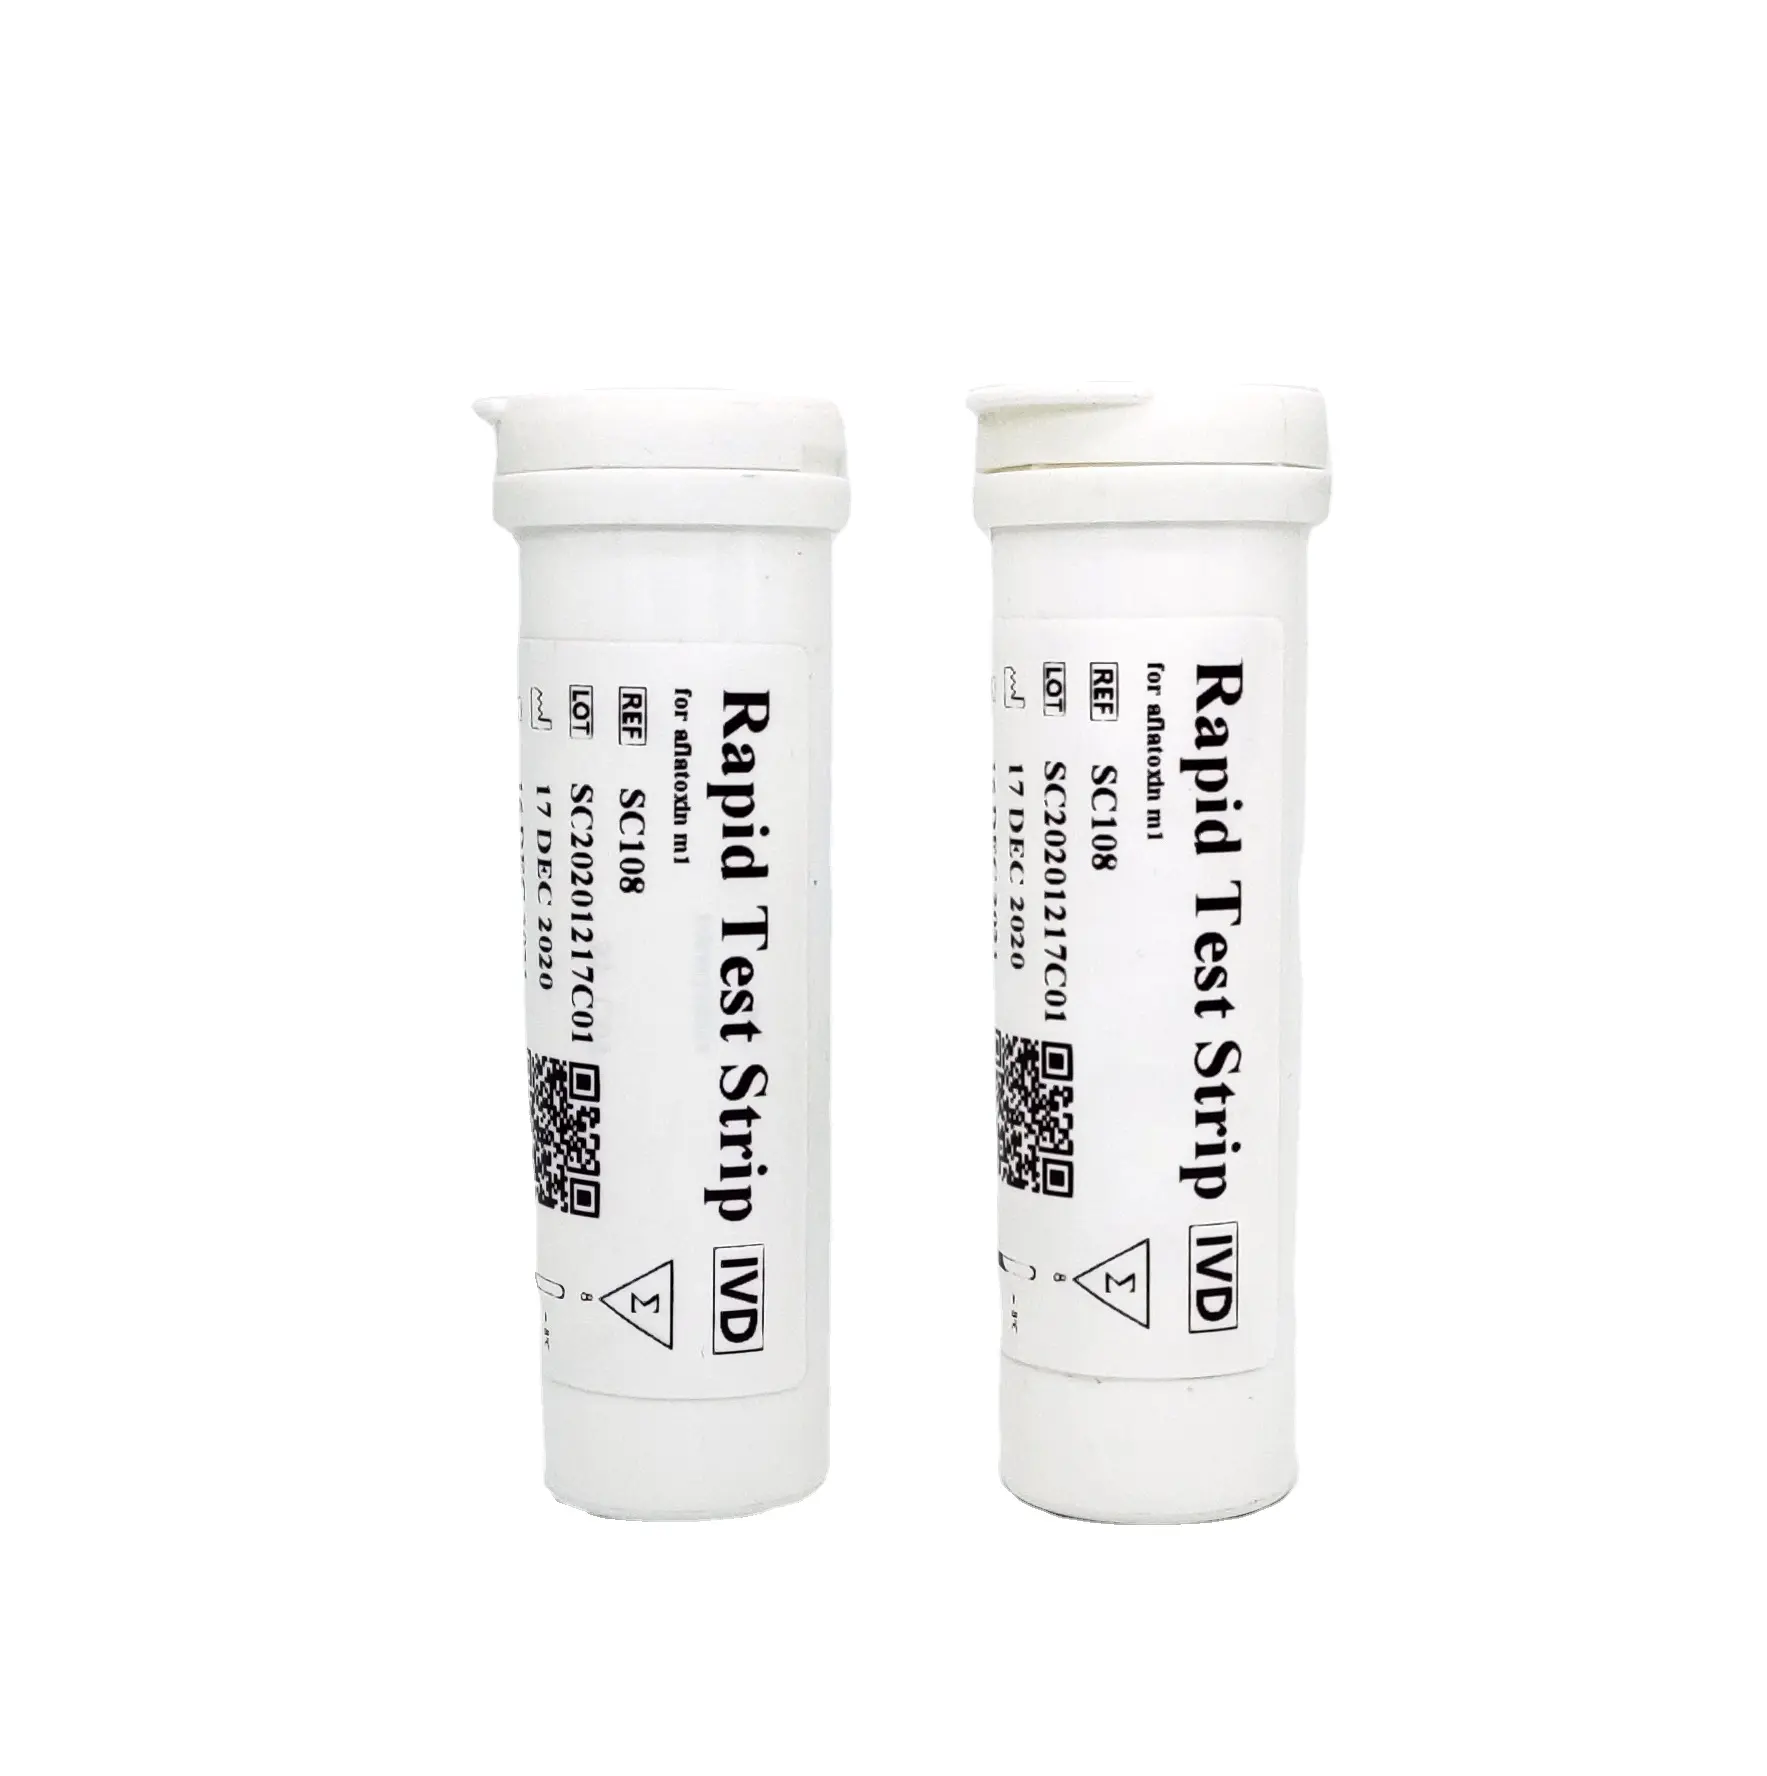 Beta-lactams and Tetracyclines Combo Rapid Test Kit for Cow / Goat Milk EU Standard